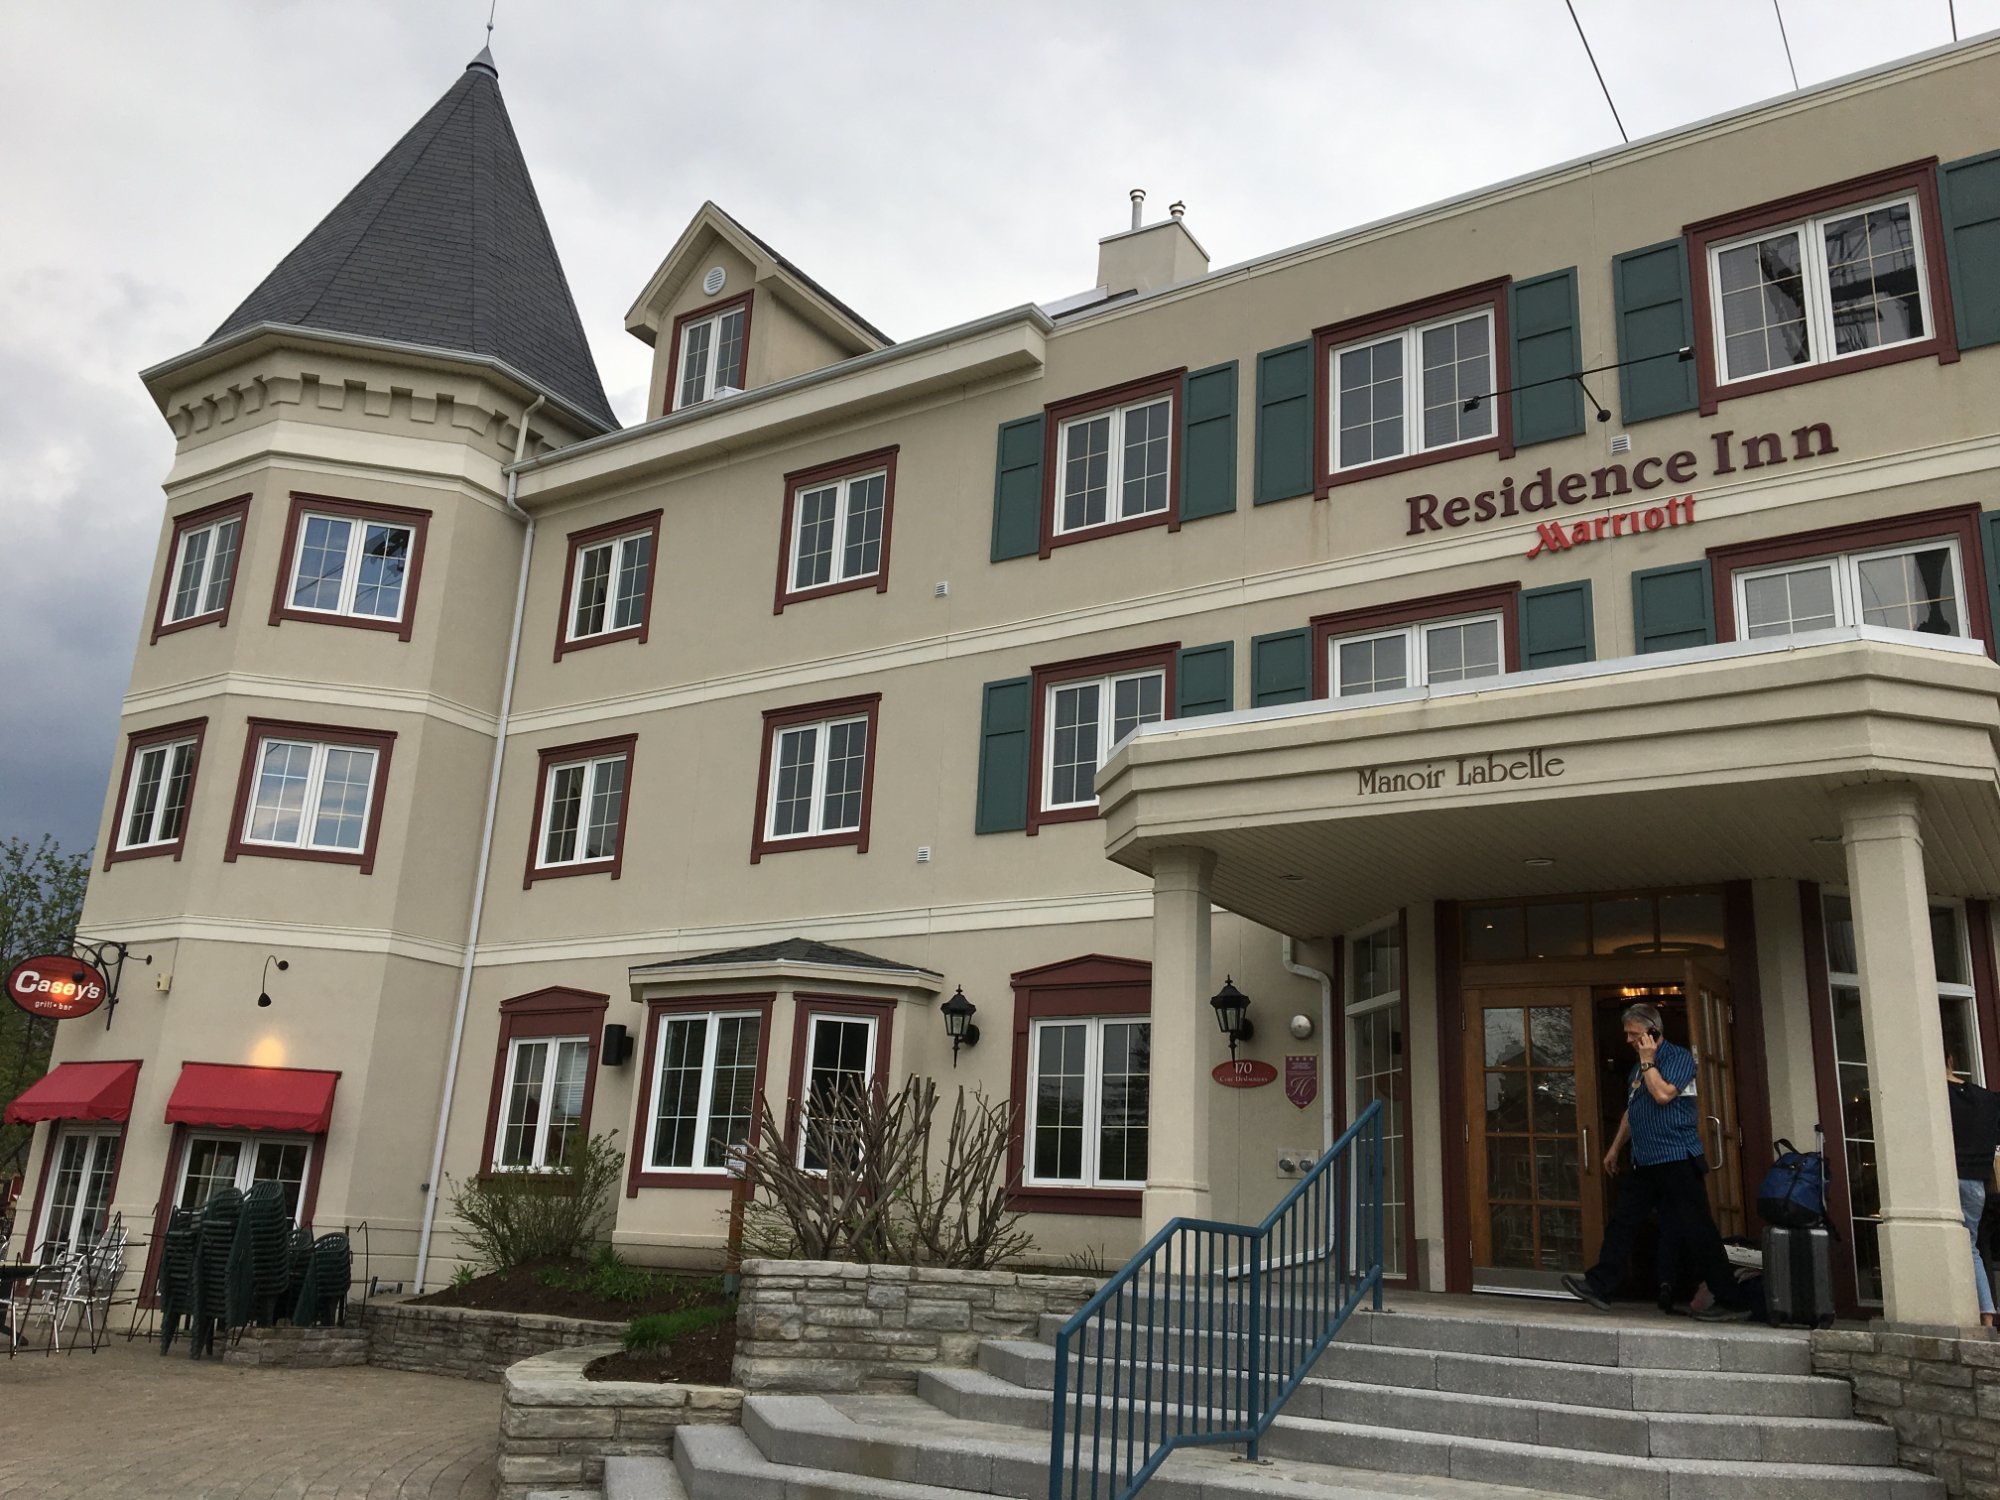 Photo of Residence Inn Mont Tremblant Manoir Labelle, Mont-Tremblant, QC, Canada